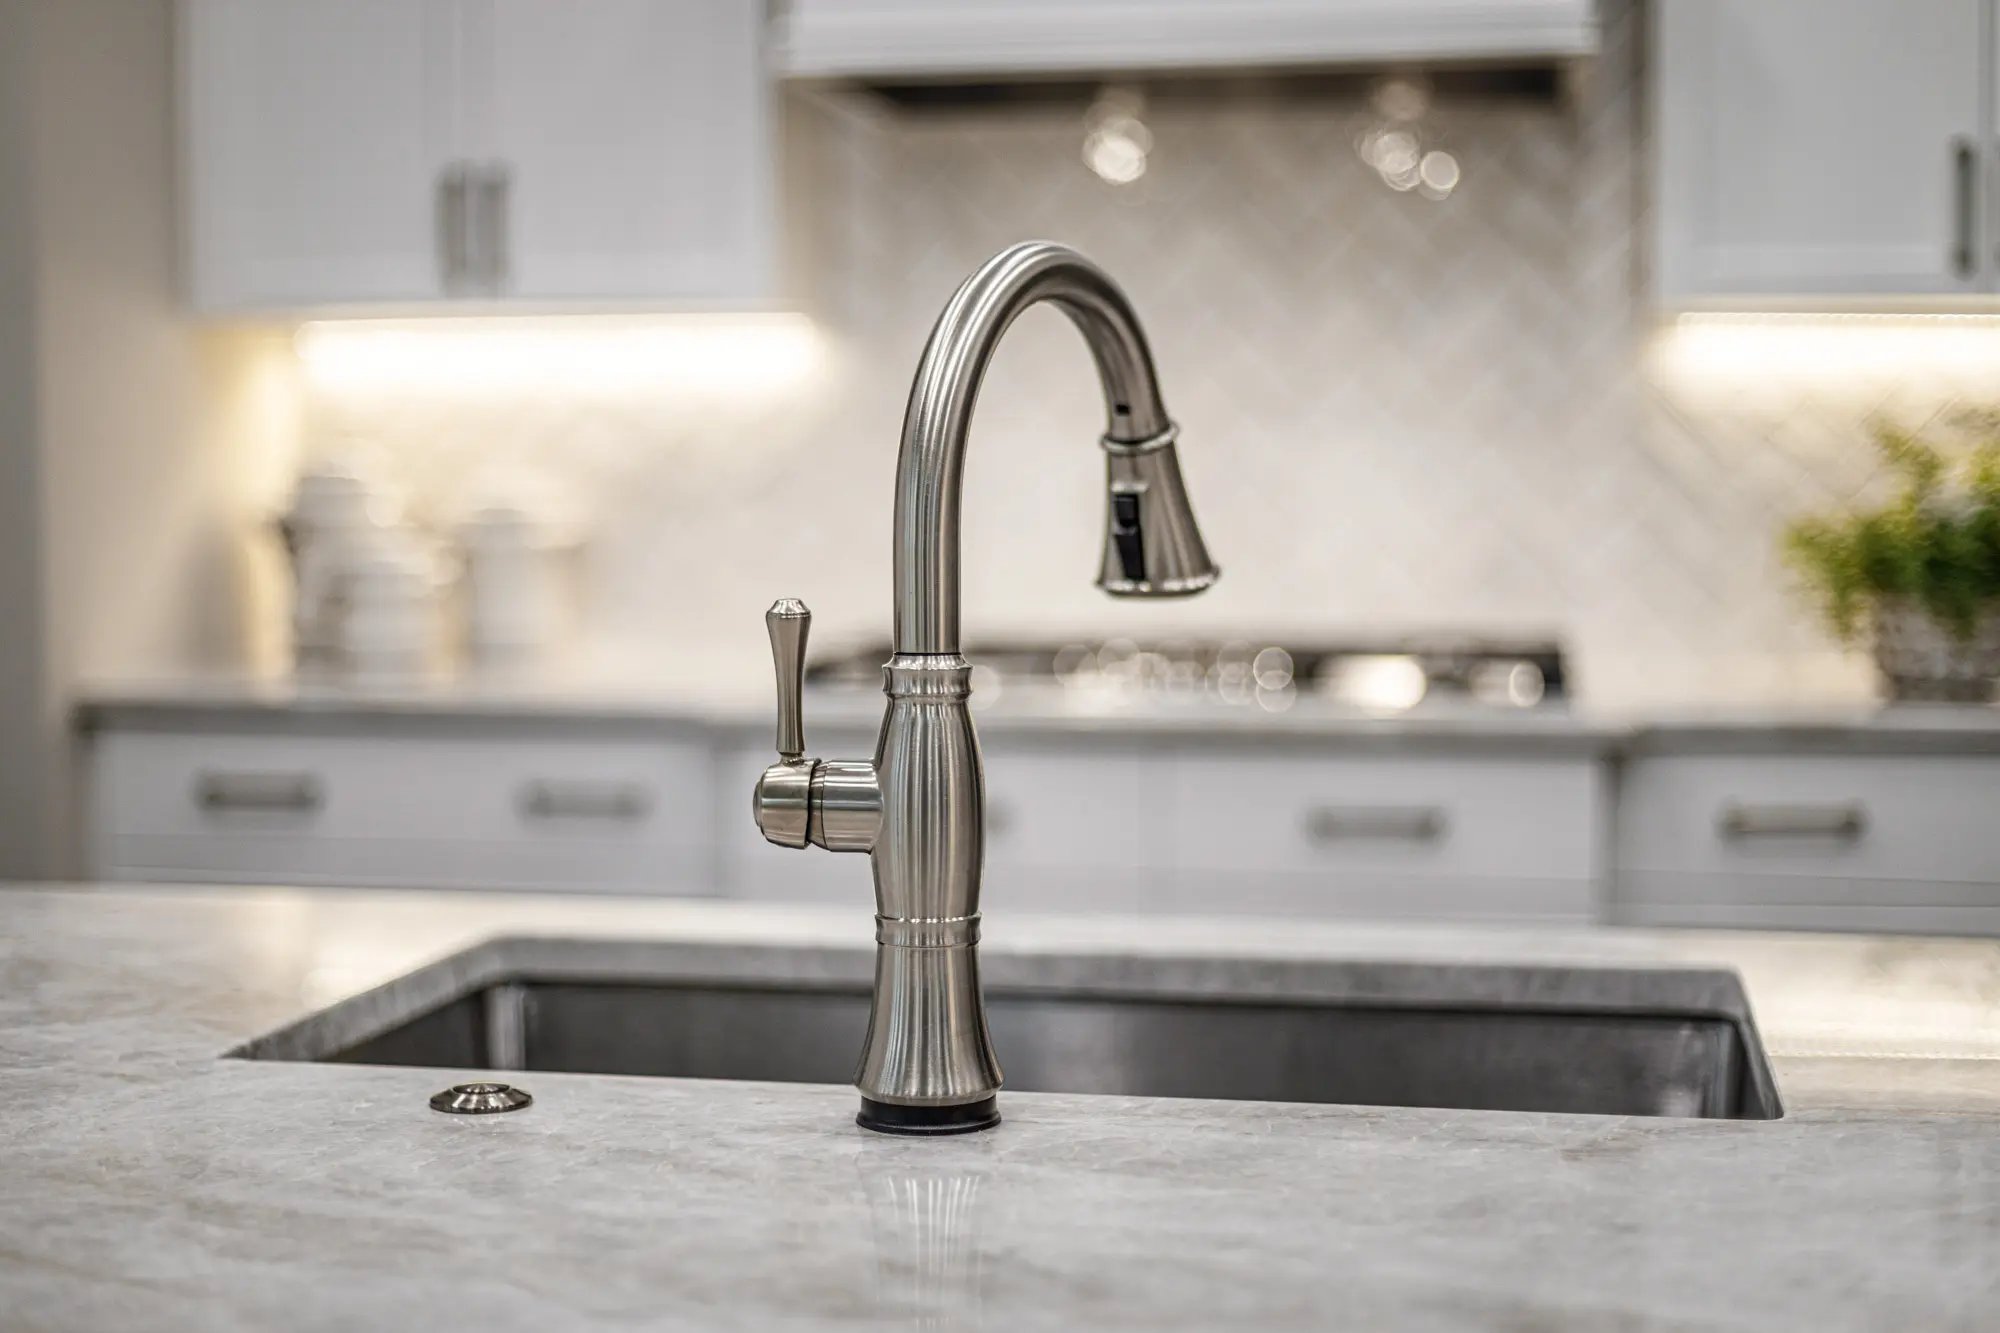 Elegant kitchen faucet over a granite sink with a blurred herringbone tile backsplash and white cabinetry.